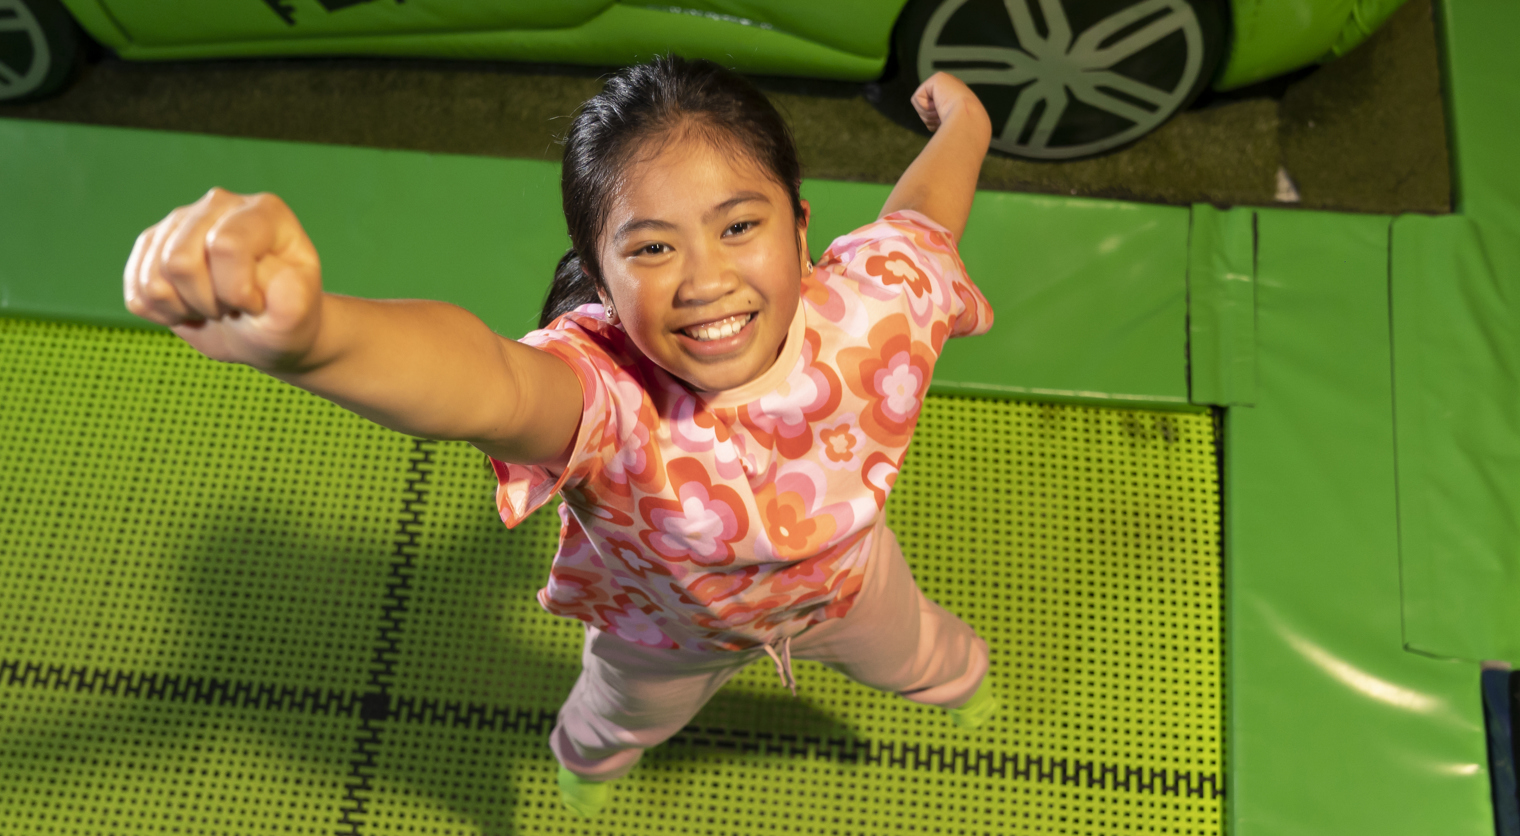 A child posing on the Trampolines at Flip Out UK